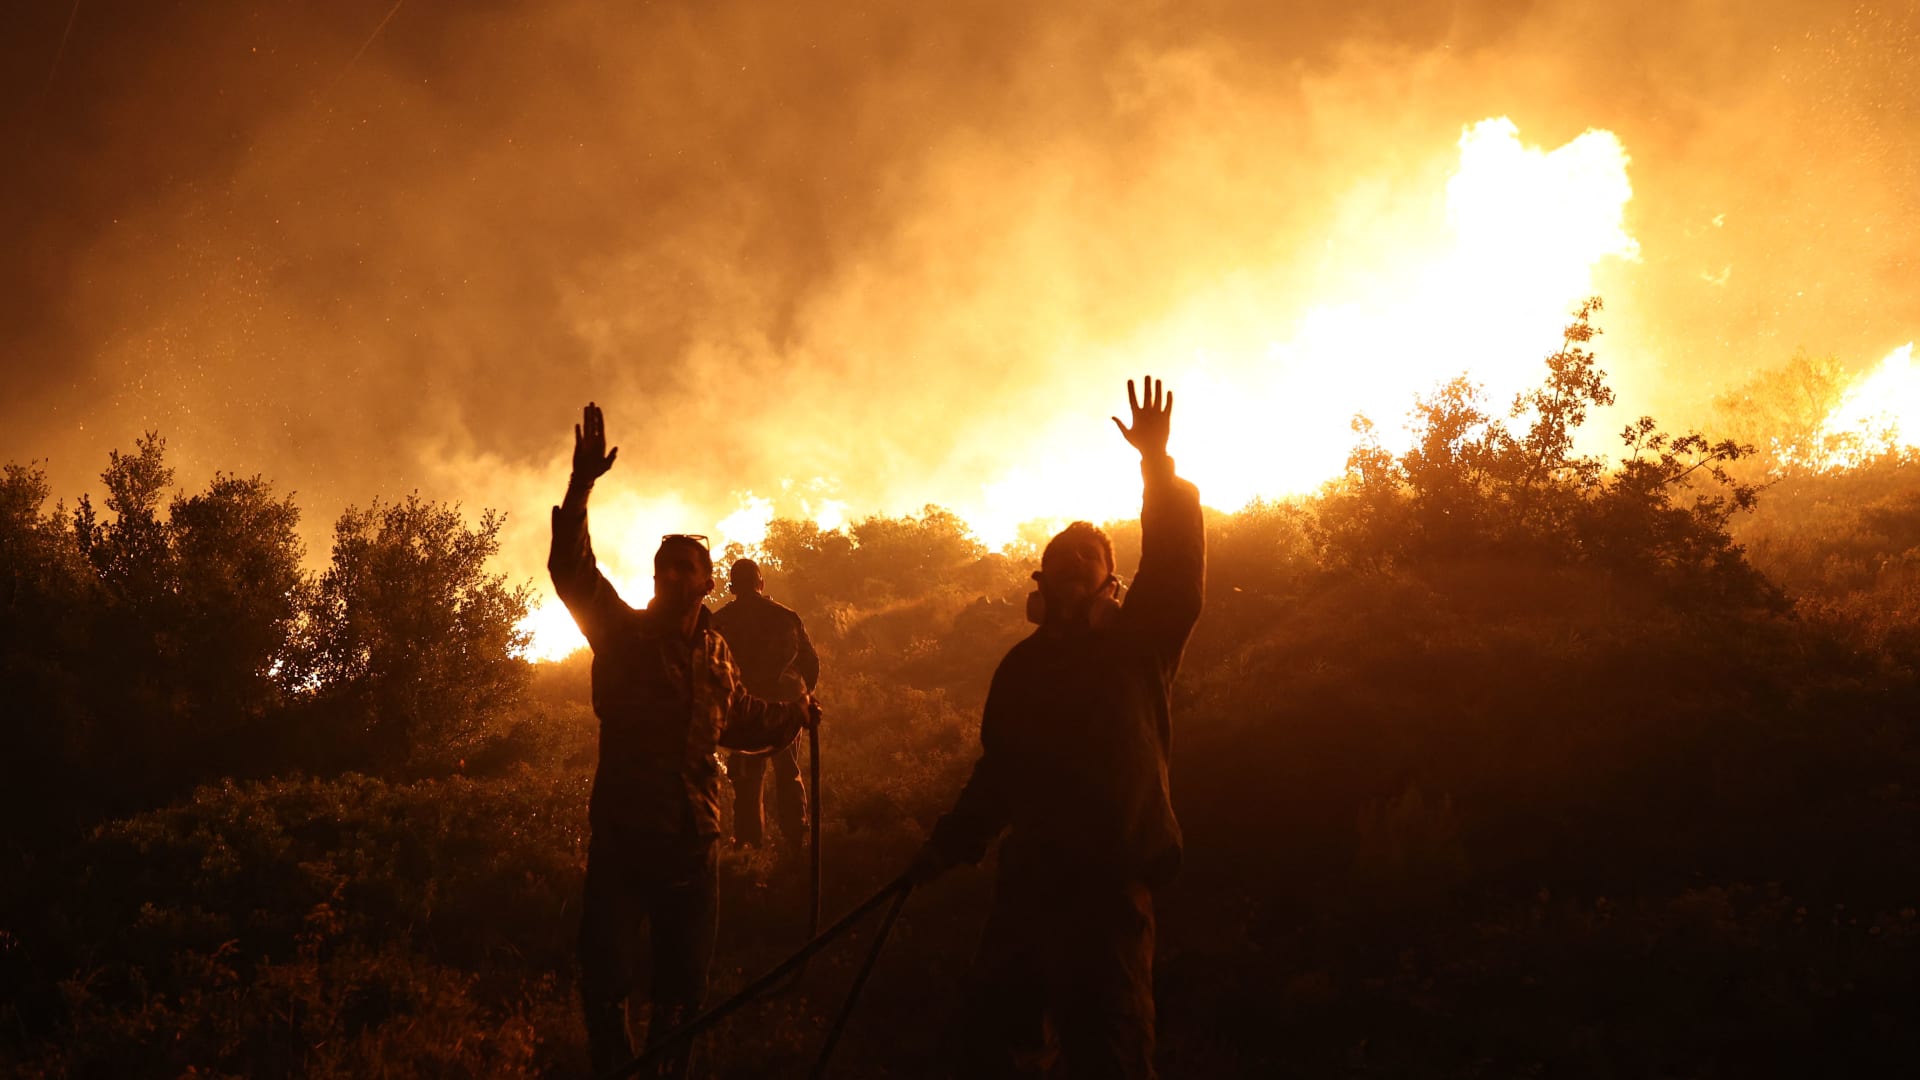 Firefighters gestures as they work to extinguish a wild fire in Drafi agglomeration, north of Athens, on July 19, 2022.